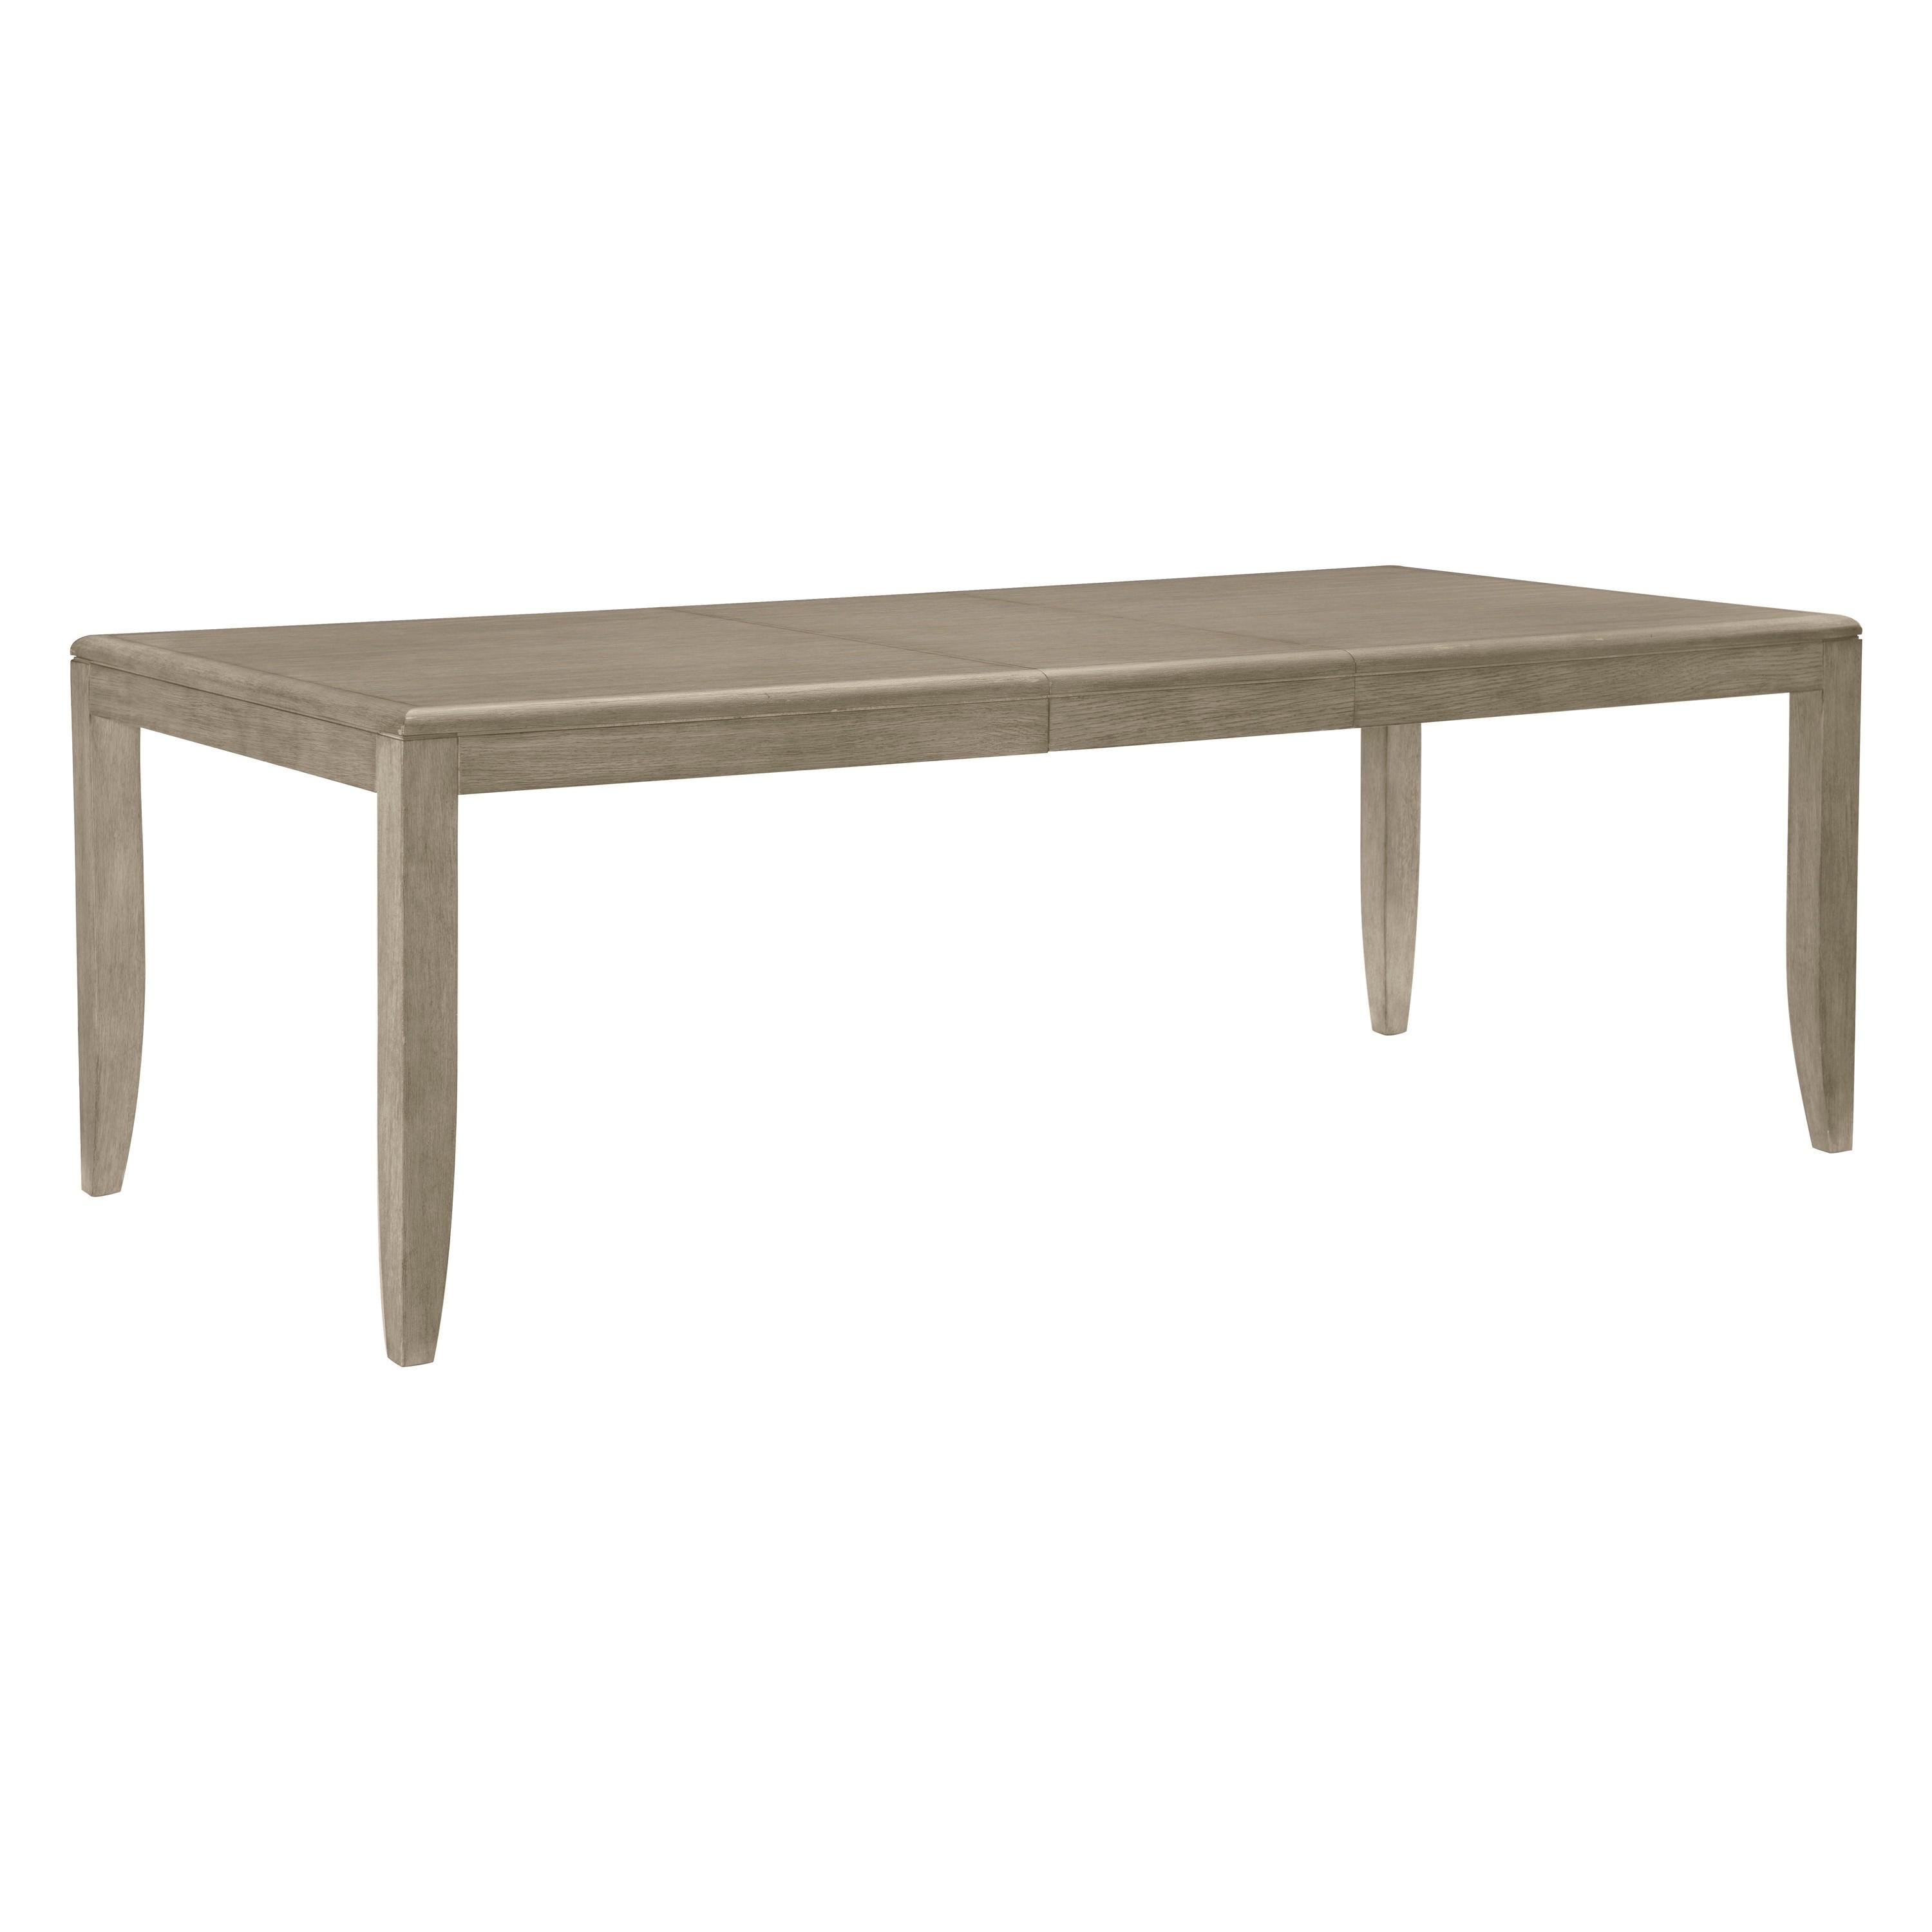 Modern Dining Table 1820-86 McKewen 1820-86 in Gray 